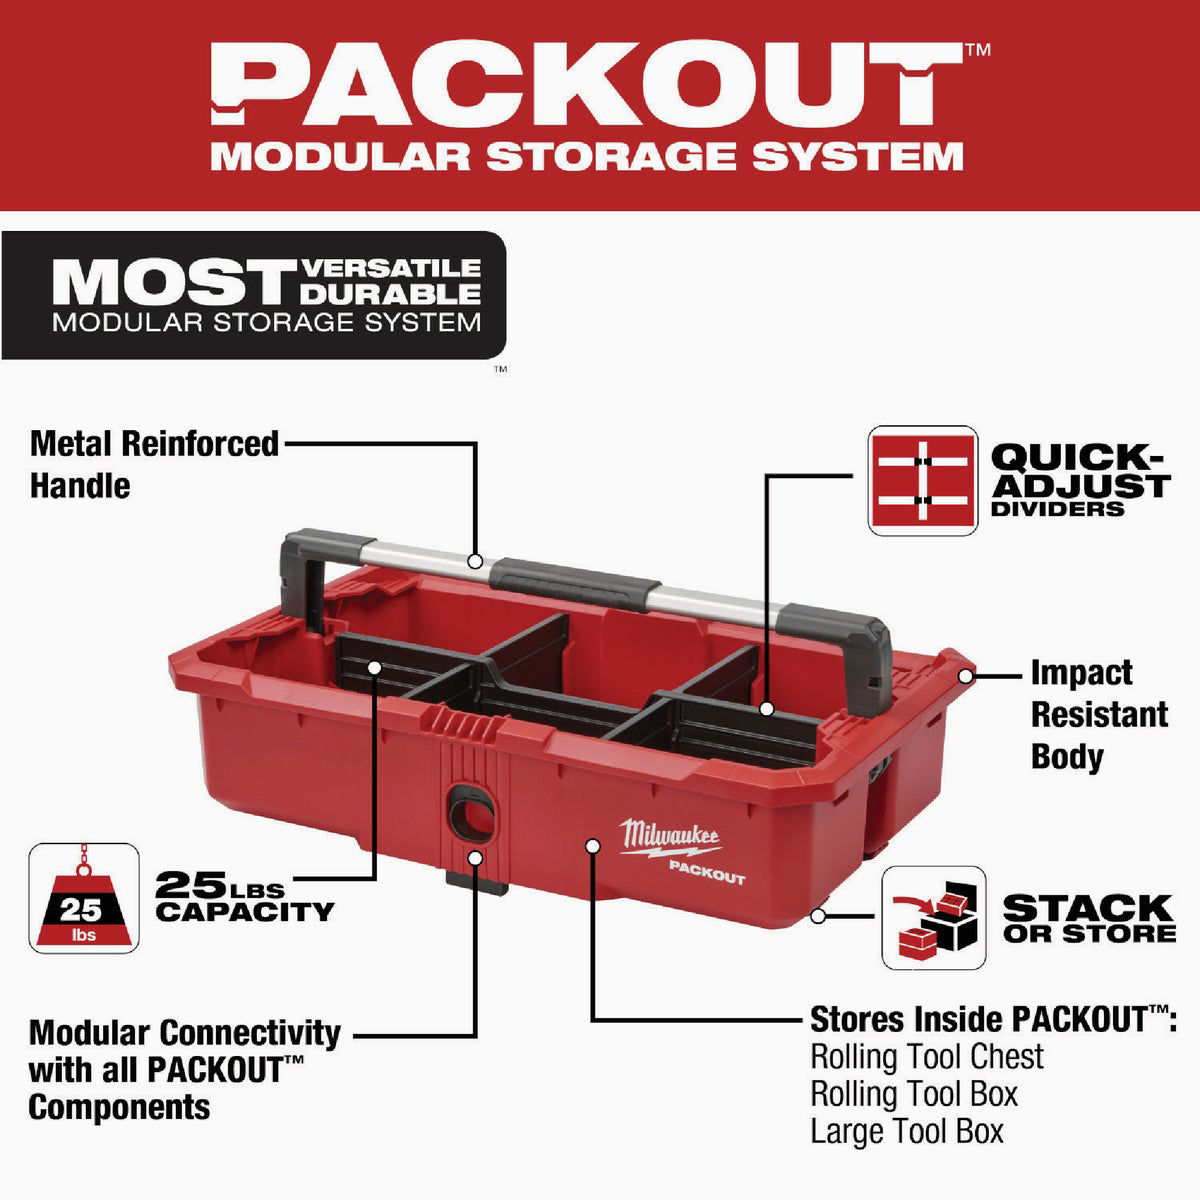 Milwaukee PACKOUT 25 lb Plastic Tool Tray, Red  Buy Tool Boxes & Totes &  More at Southern Pipe & Supply